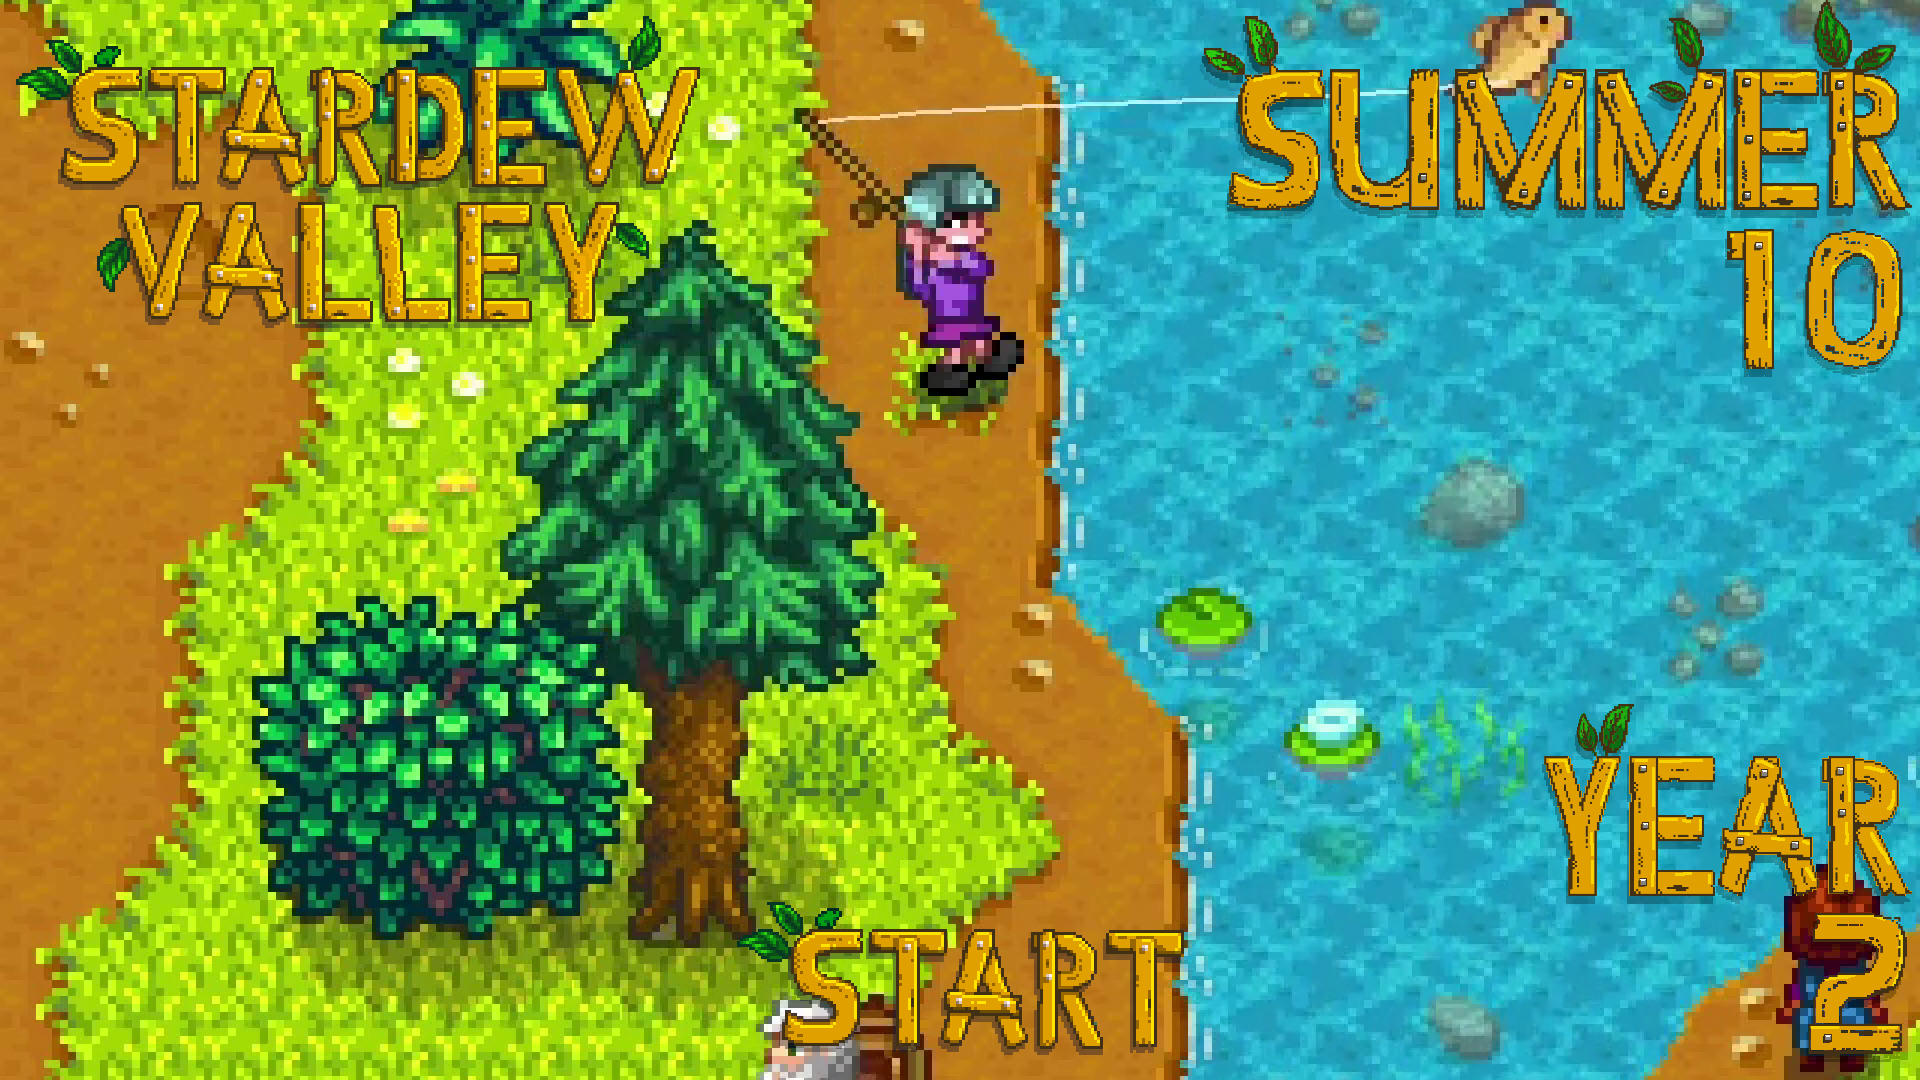 You Can Do Whatever You Want To a Fish – Stardew Valley, Summer 10, Year 2, Start